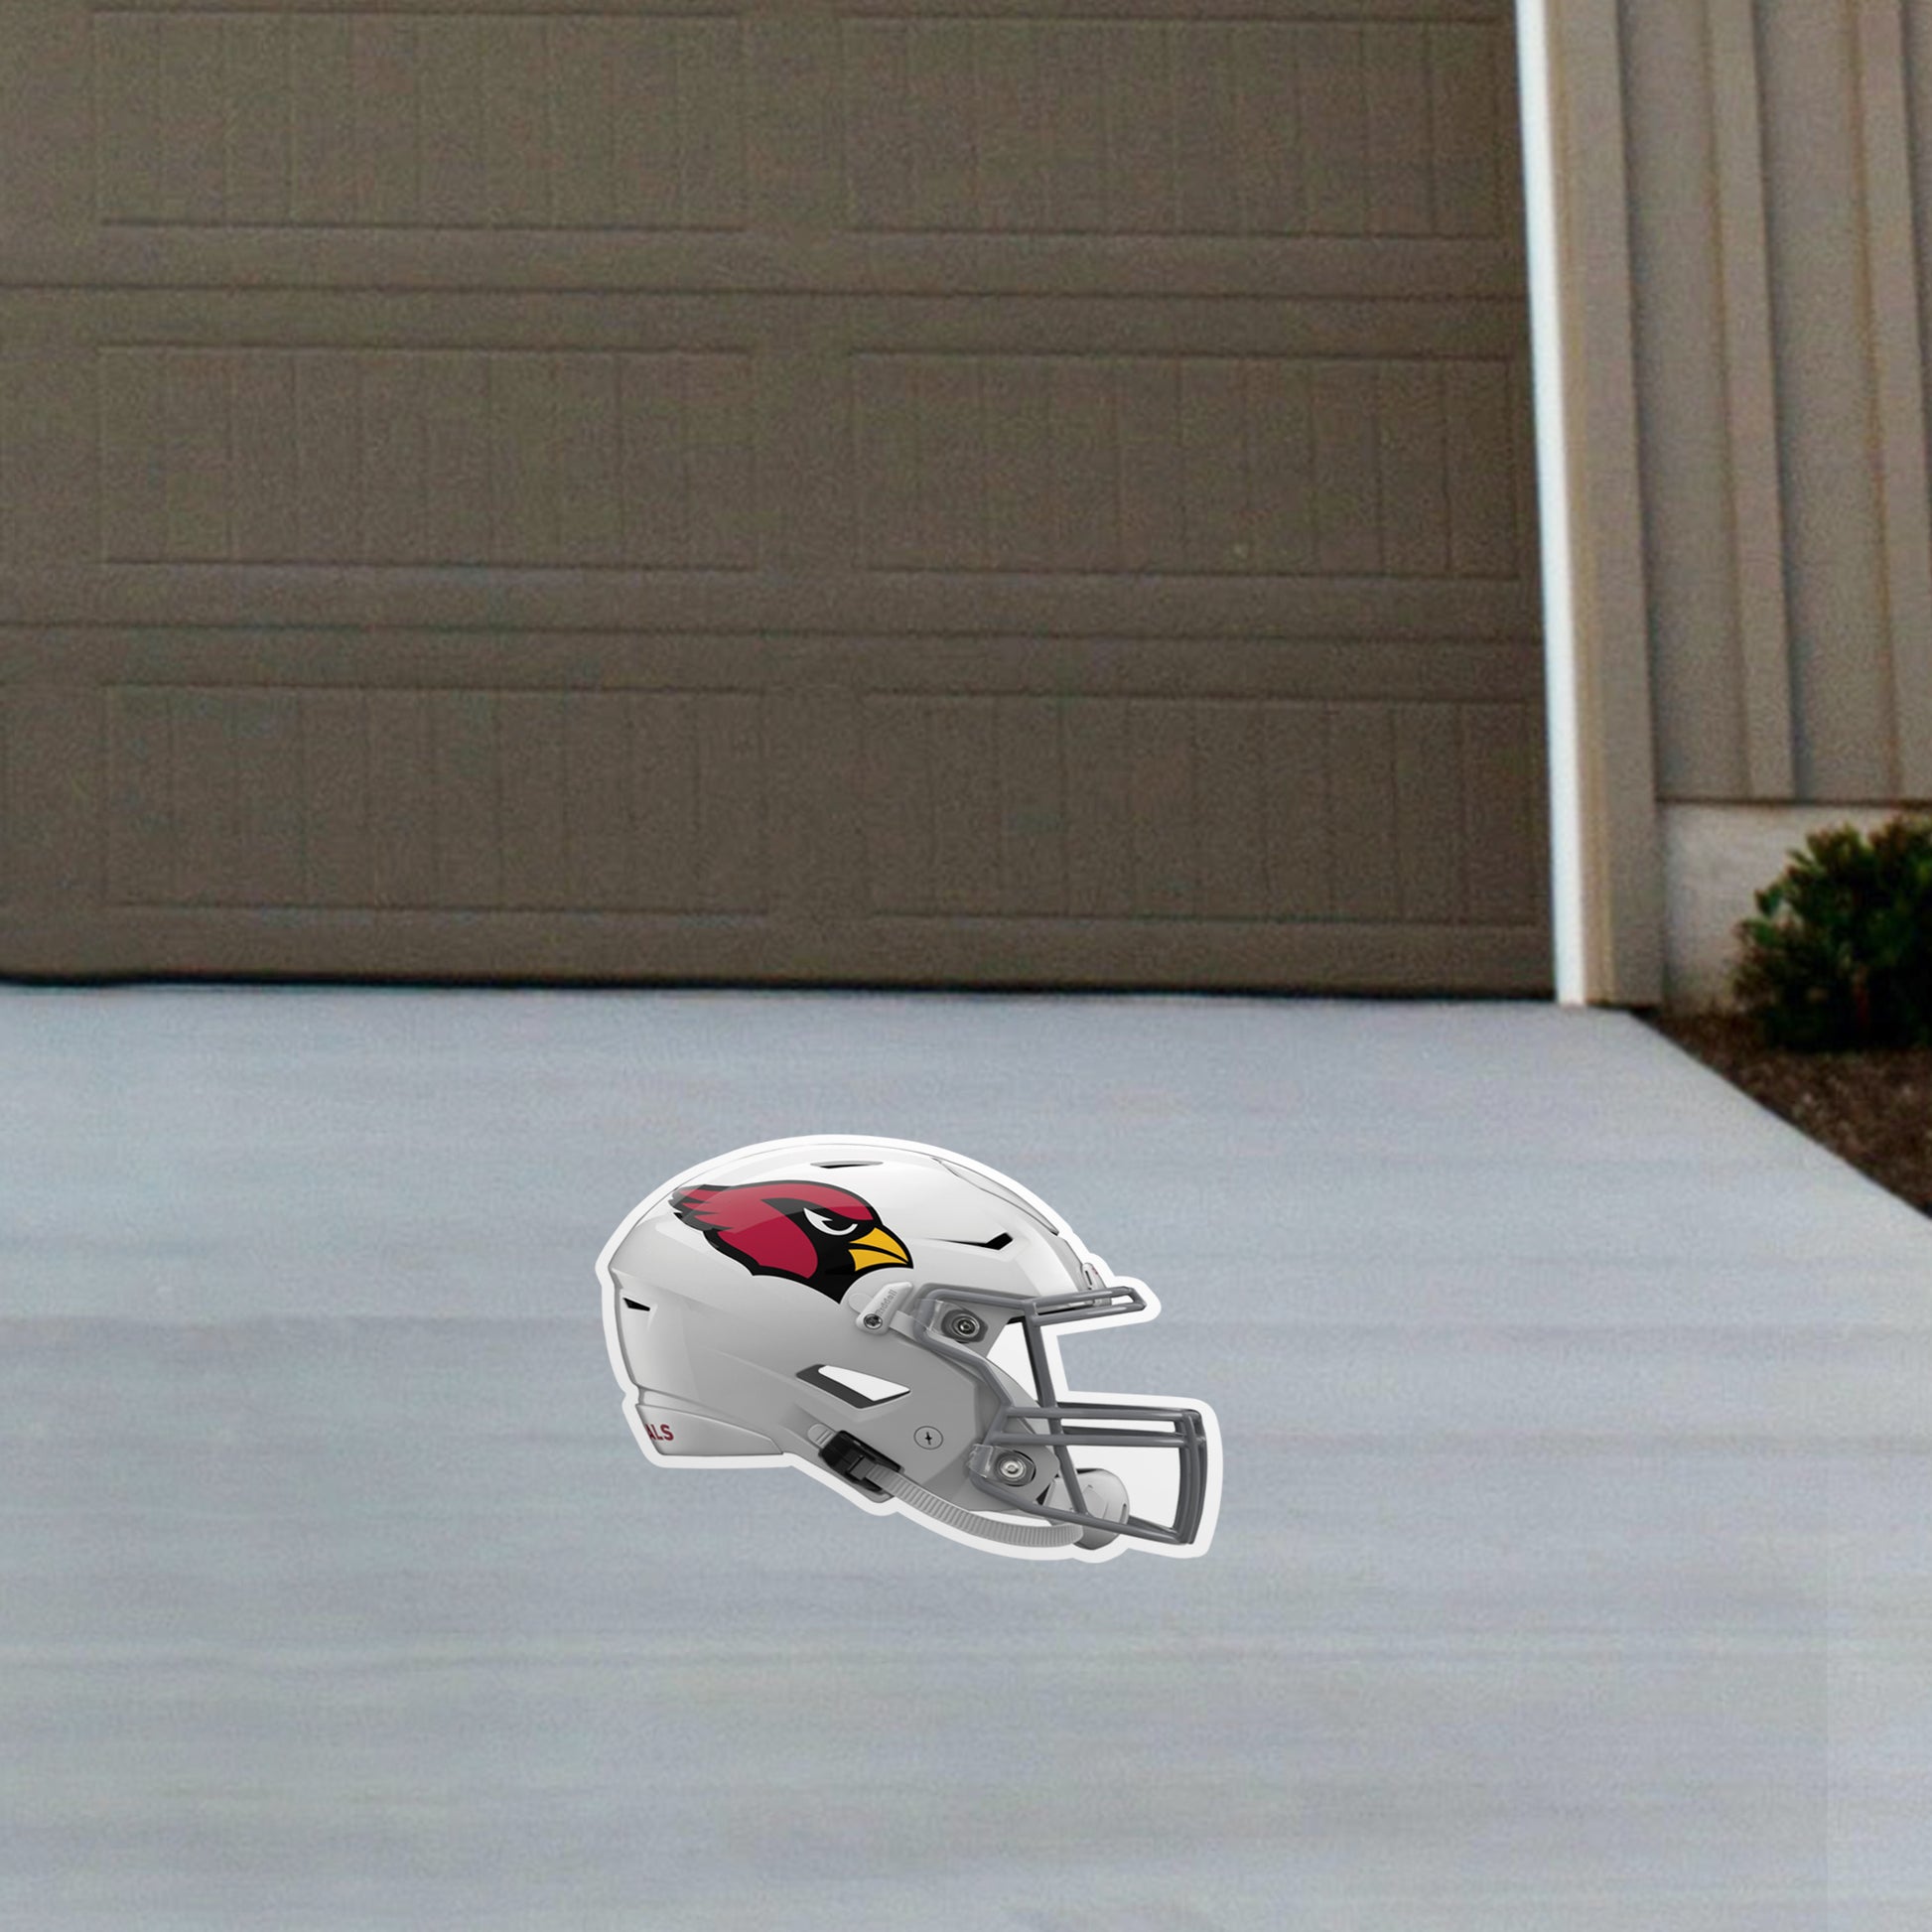 Arizona Cardinals: - Officially Licensed NFL Peel & Stick